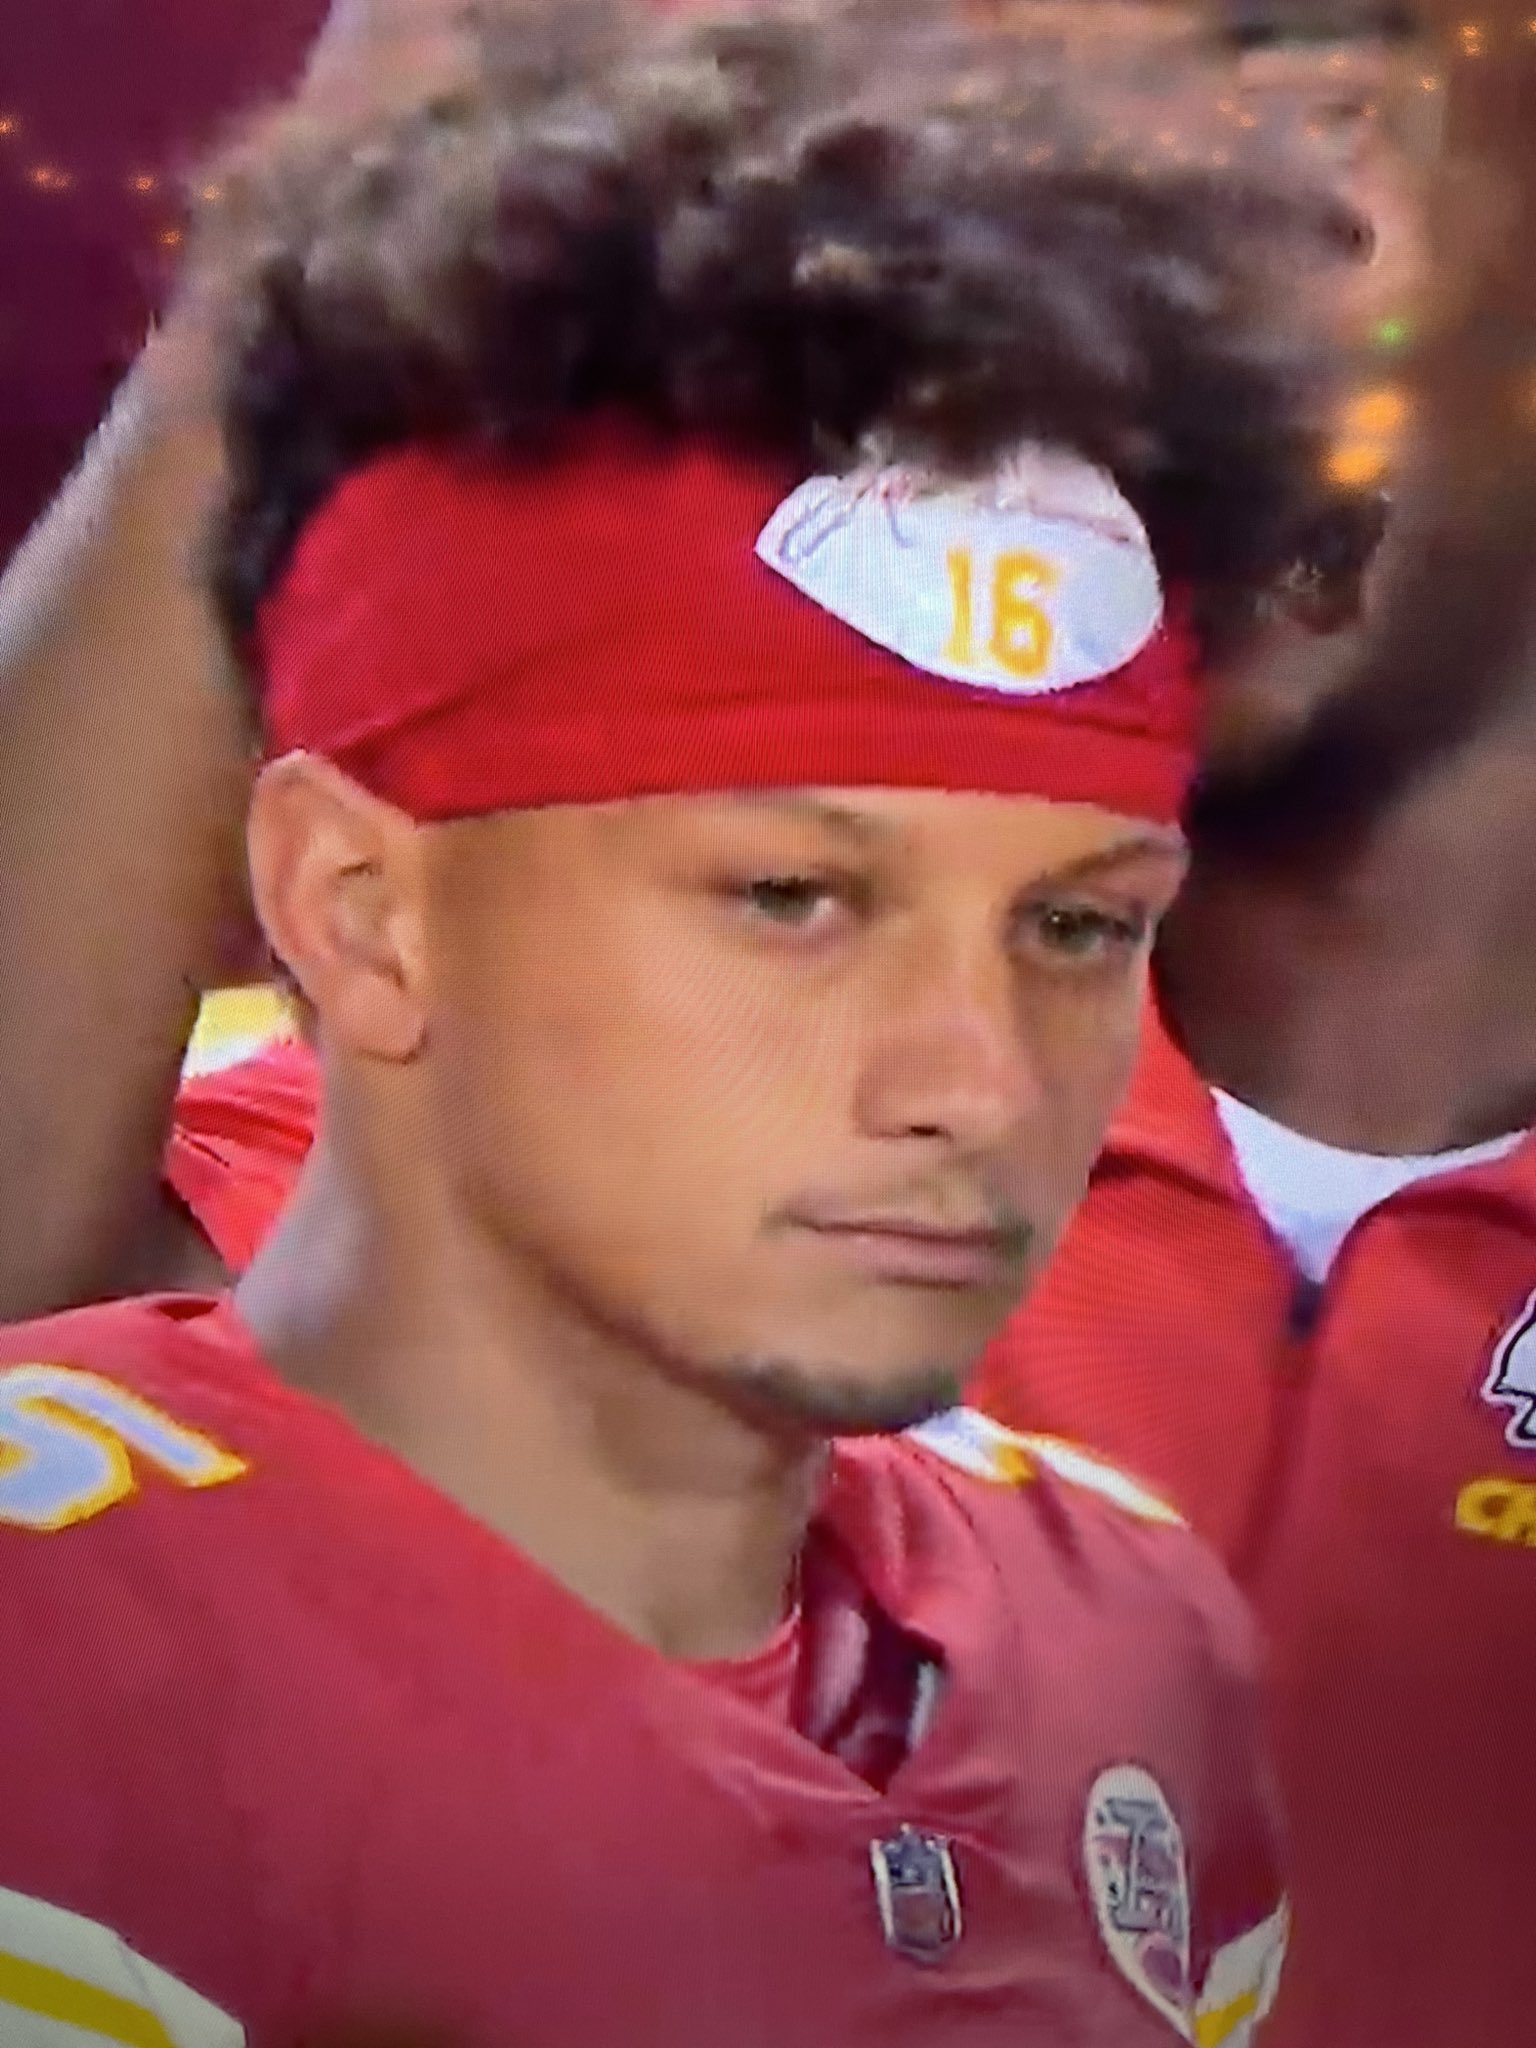 Joshua Brisco on Twitter: "Just noticed that Patrick Mahomes is wearing a different headband tonight. That's #16. https://t.co/ESP5JyoGqq" / Twitter